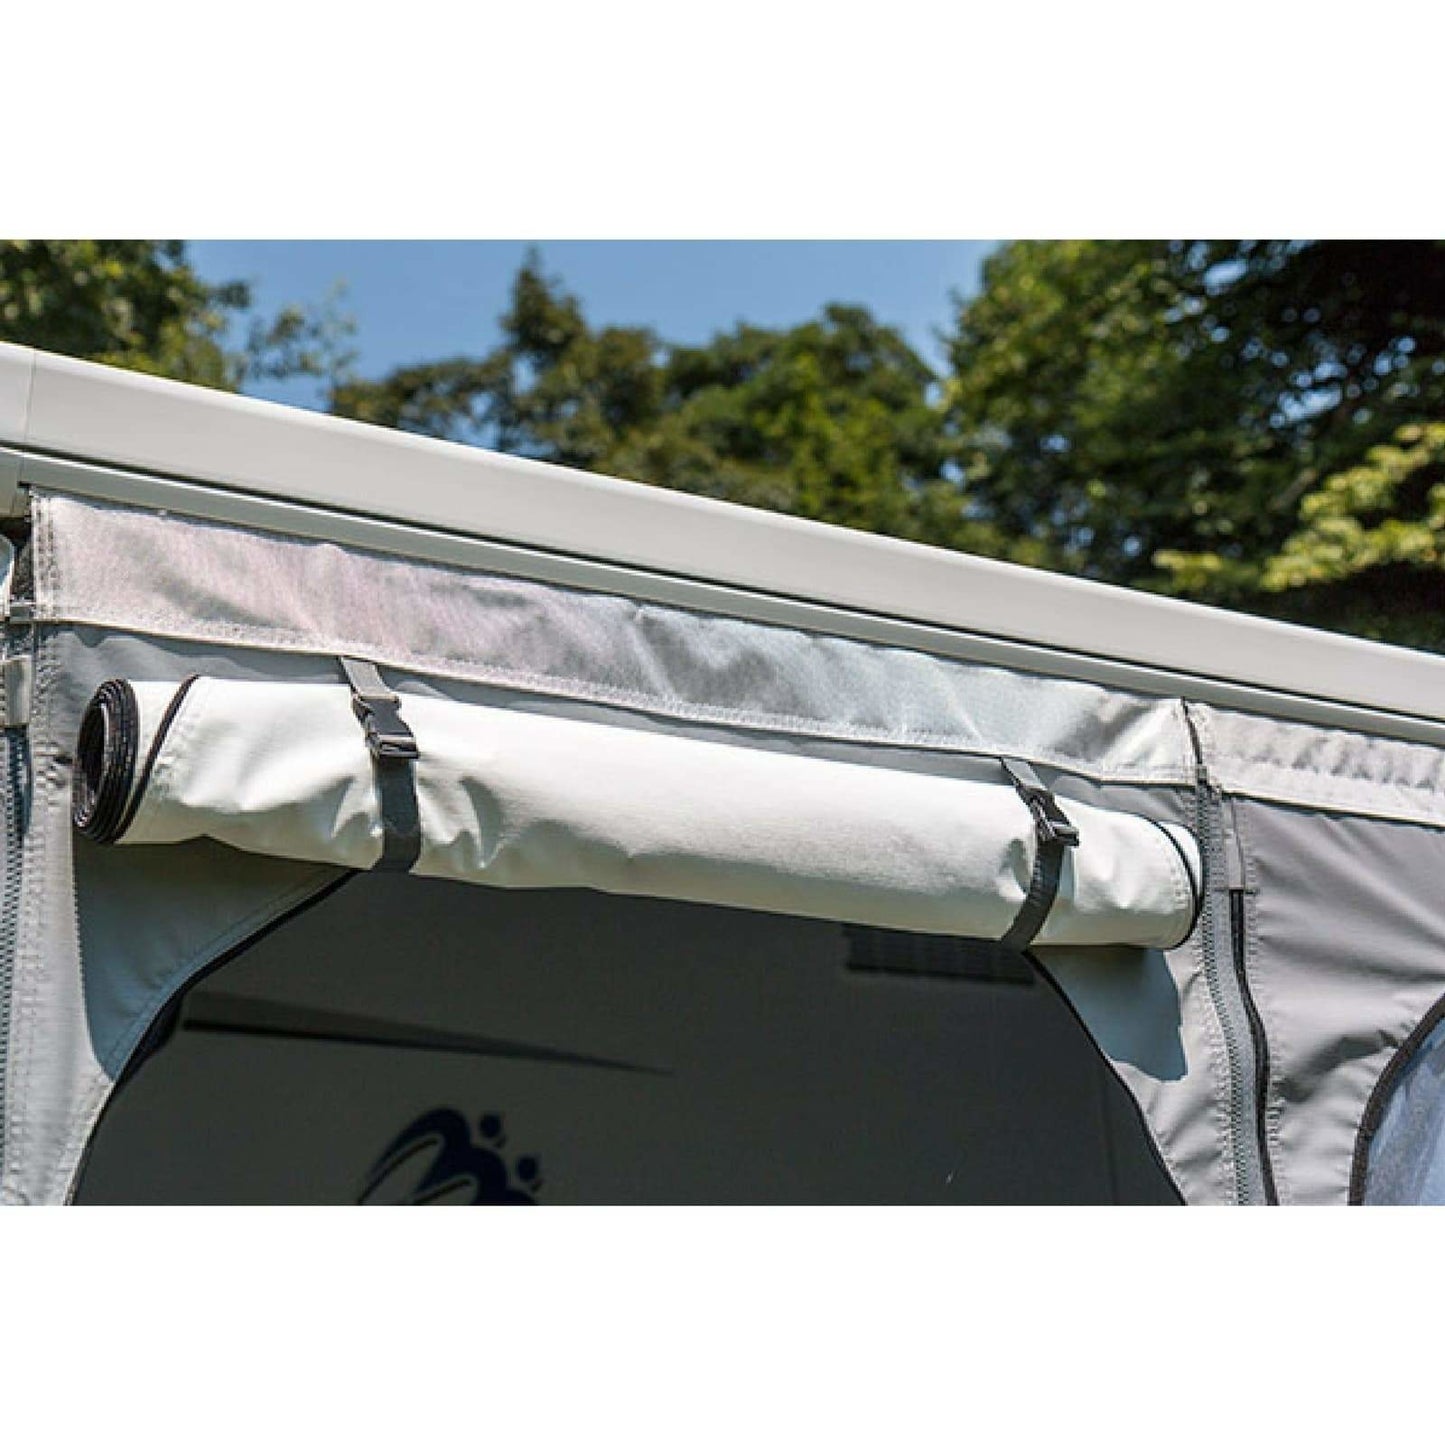 Fiamma Medium Privacy Room made by Fiamma. A Tent sold by Quality Caravan Awnings